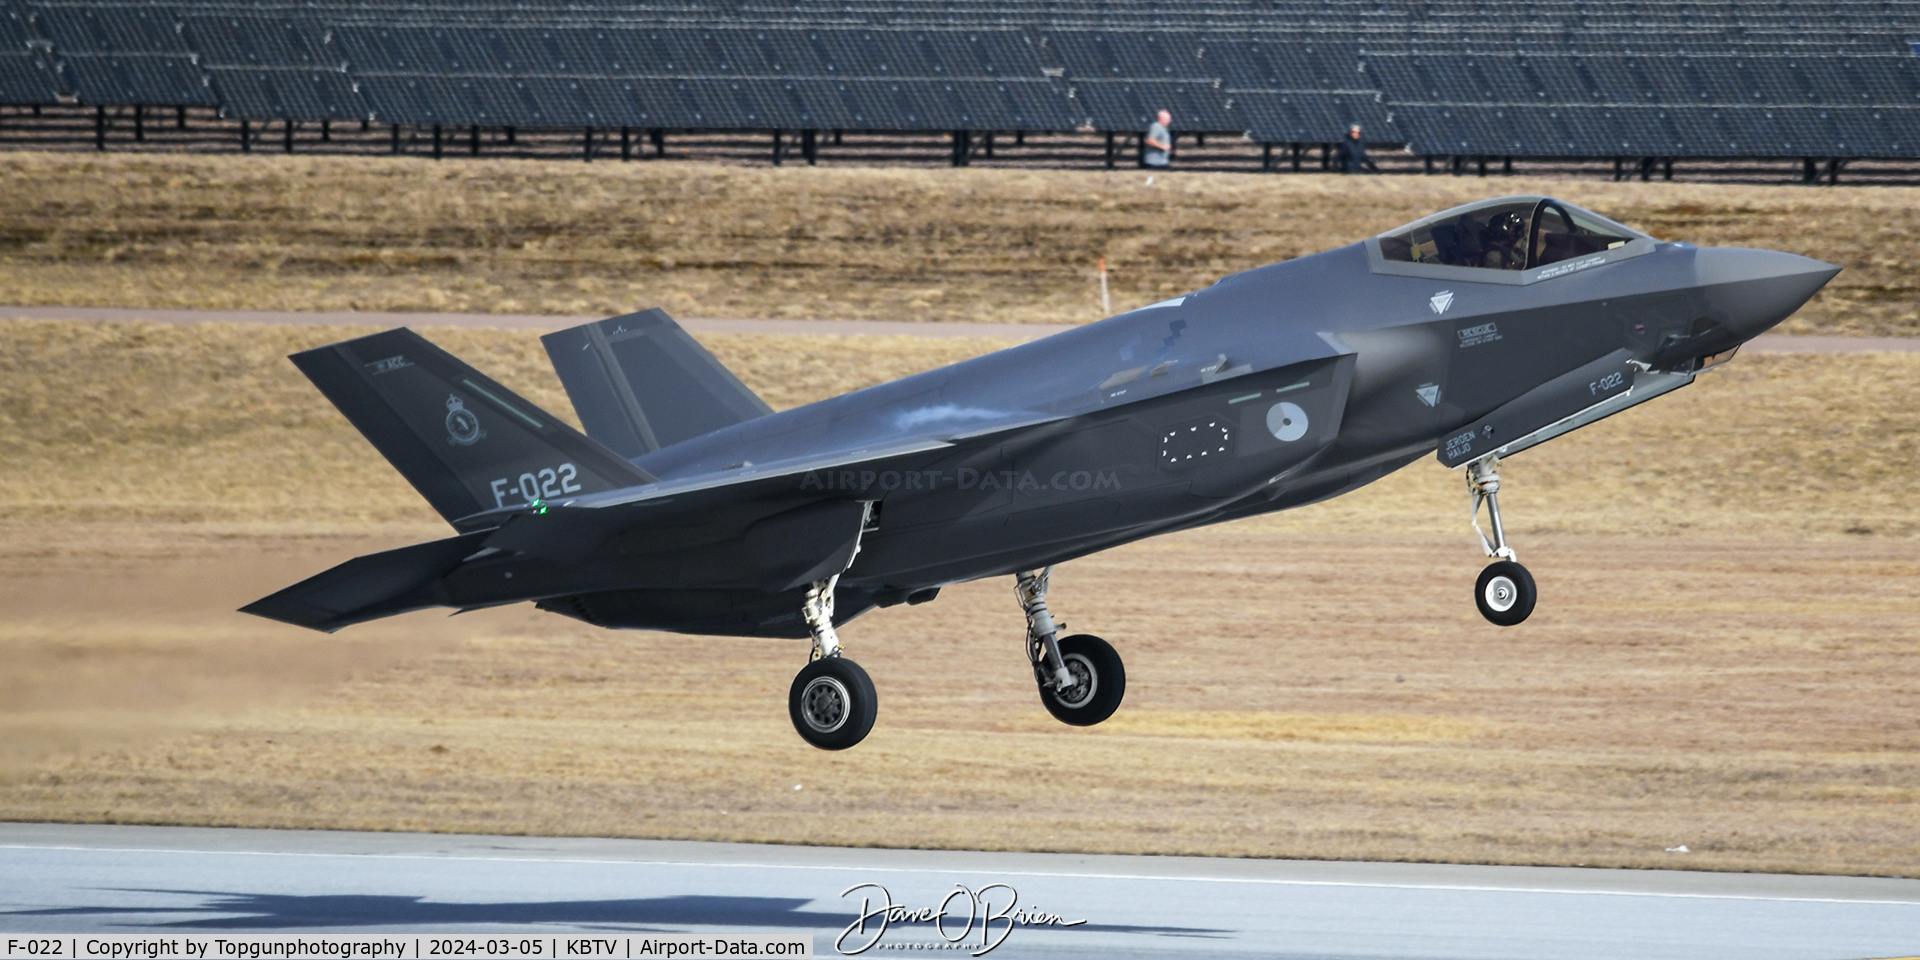 F-022, 2022 Lockheed F-35A C/N AN-22, 2nd group departing for Nellis out of VT